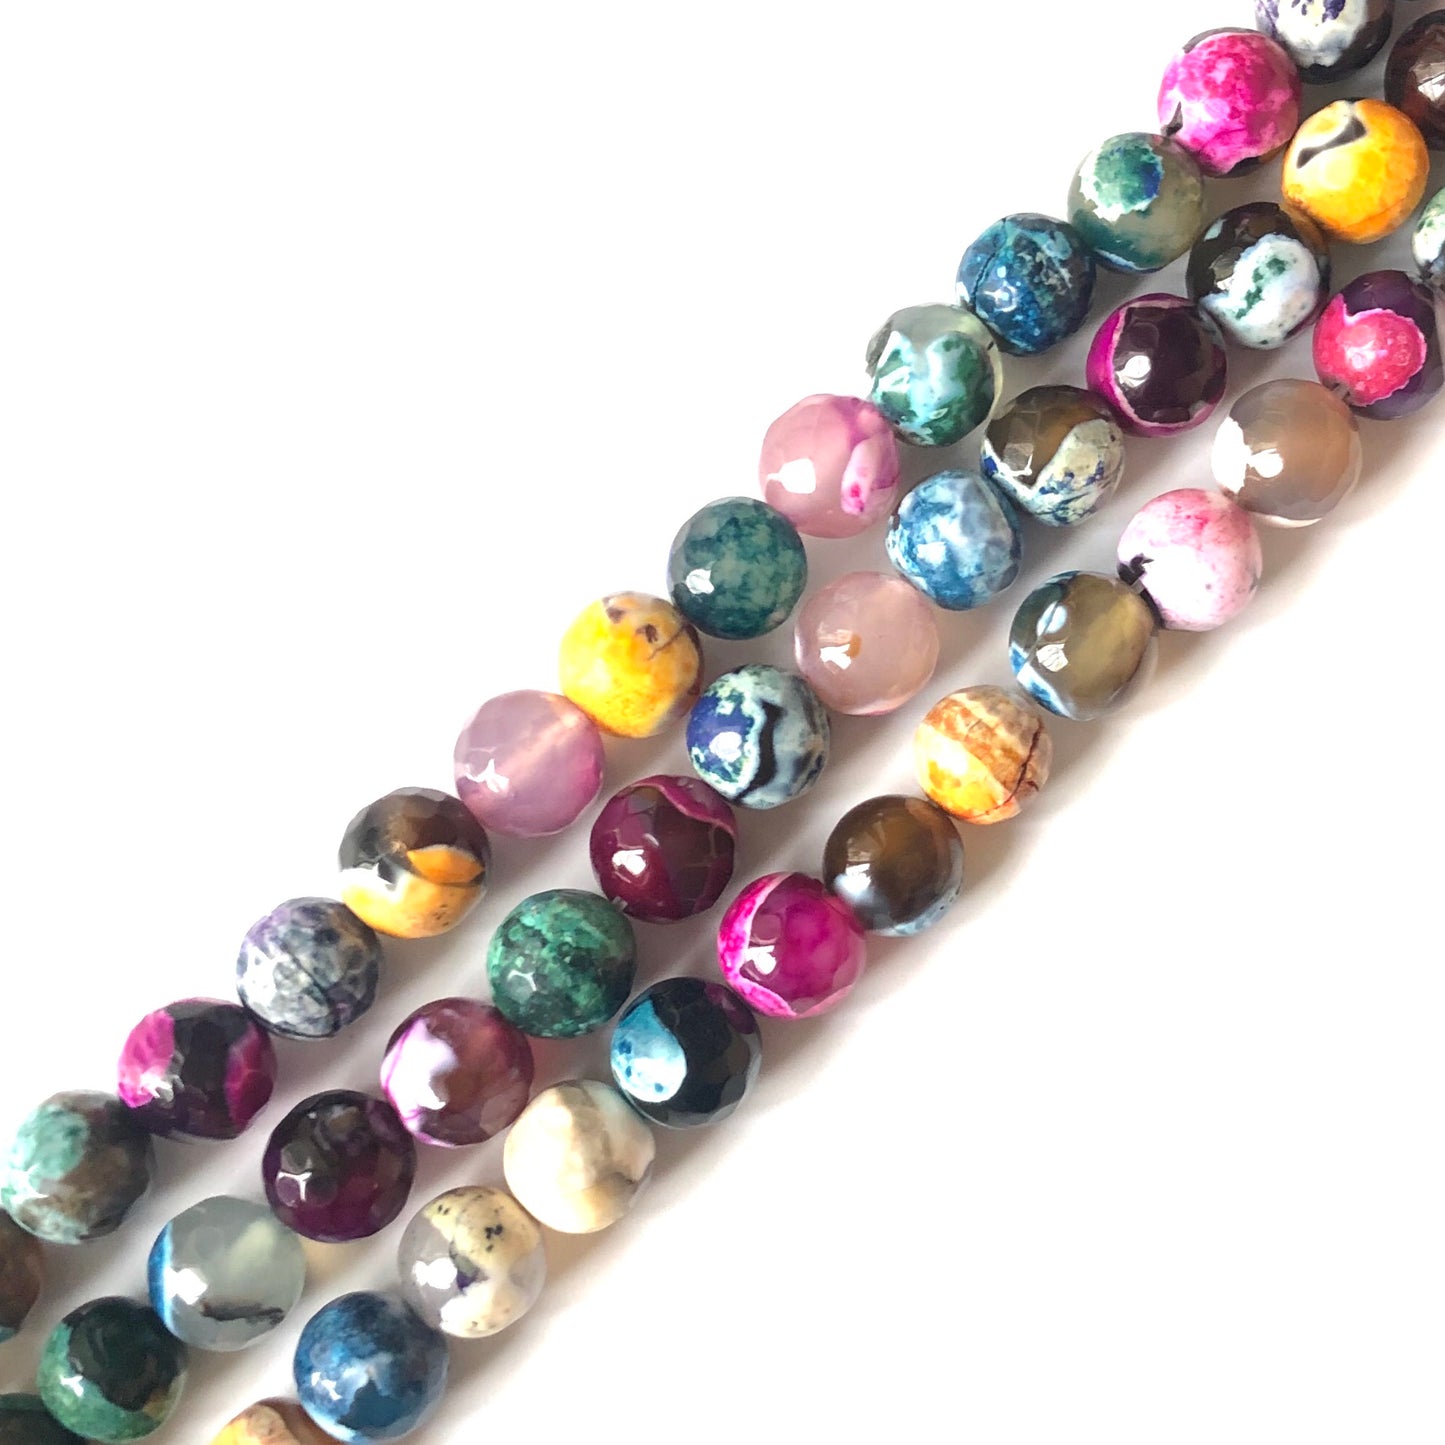 2 Strands/lot 10mm Multicolor Faceted Fire Agate Stone Beads Stone Beads Faceted Agate Beads Charms Beads Beyond